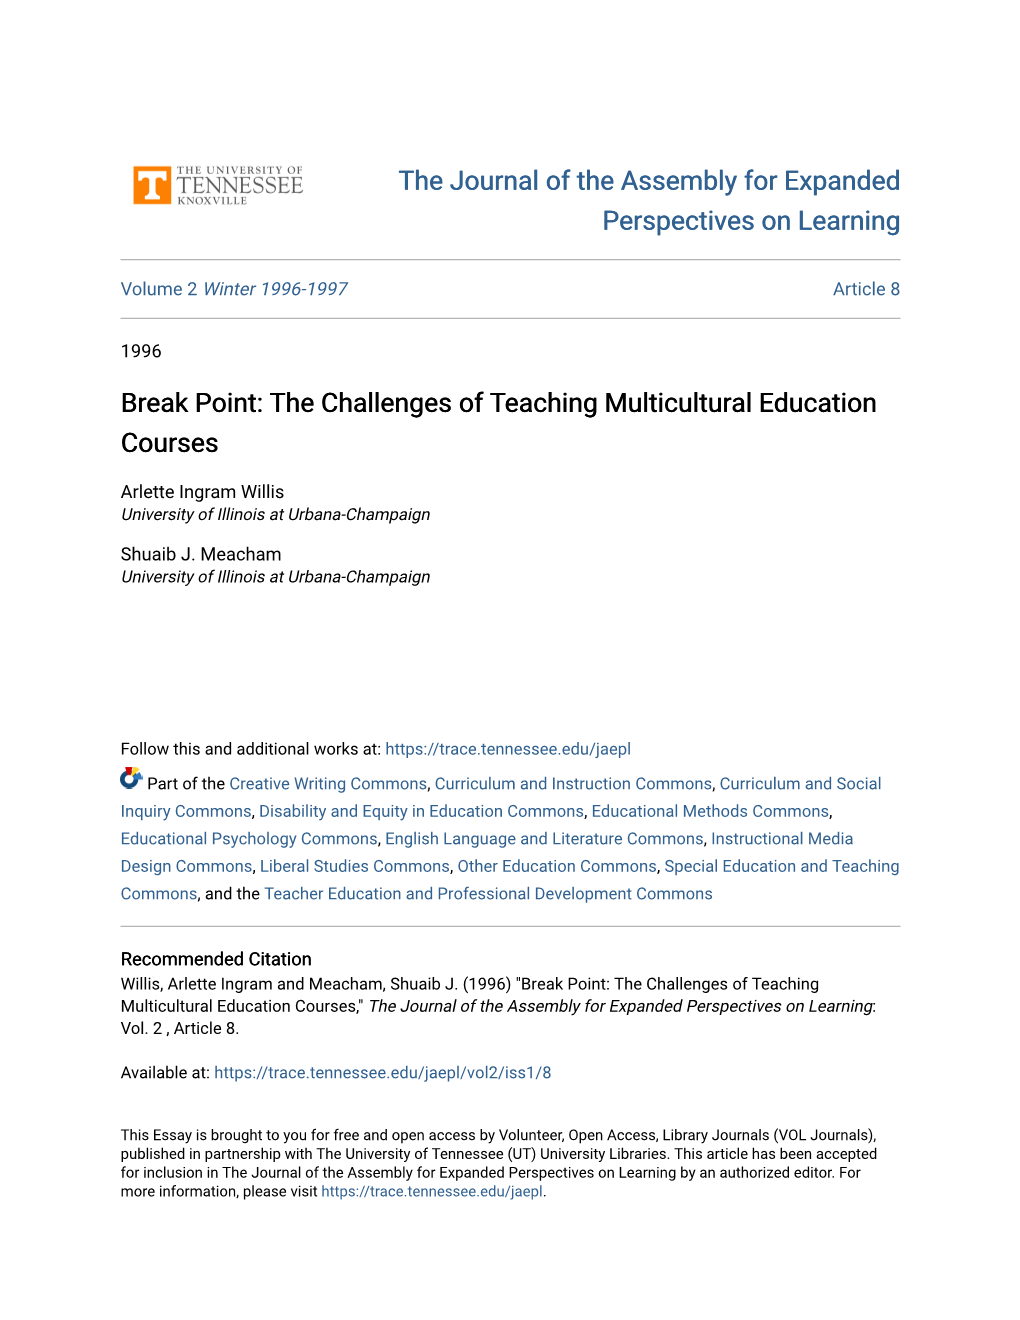 The Challenges of Teaching Multicultural Education Courses